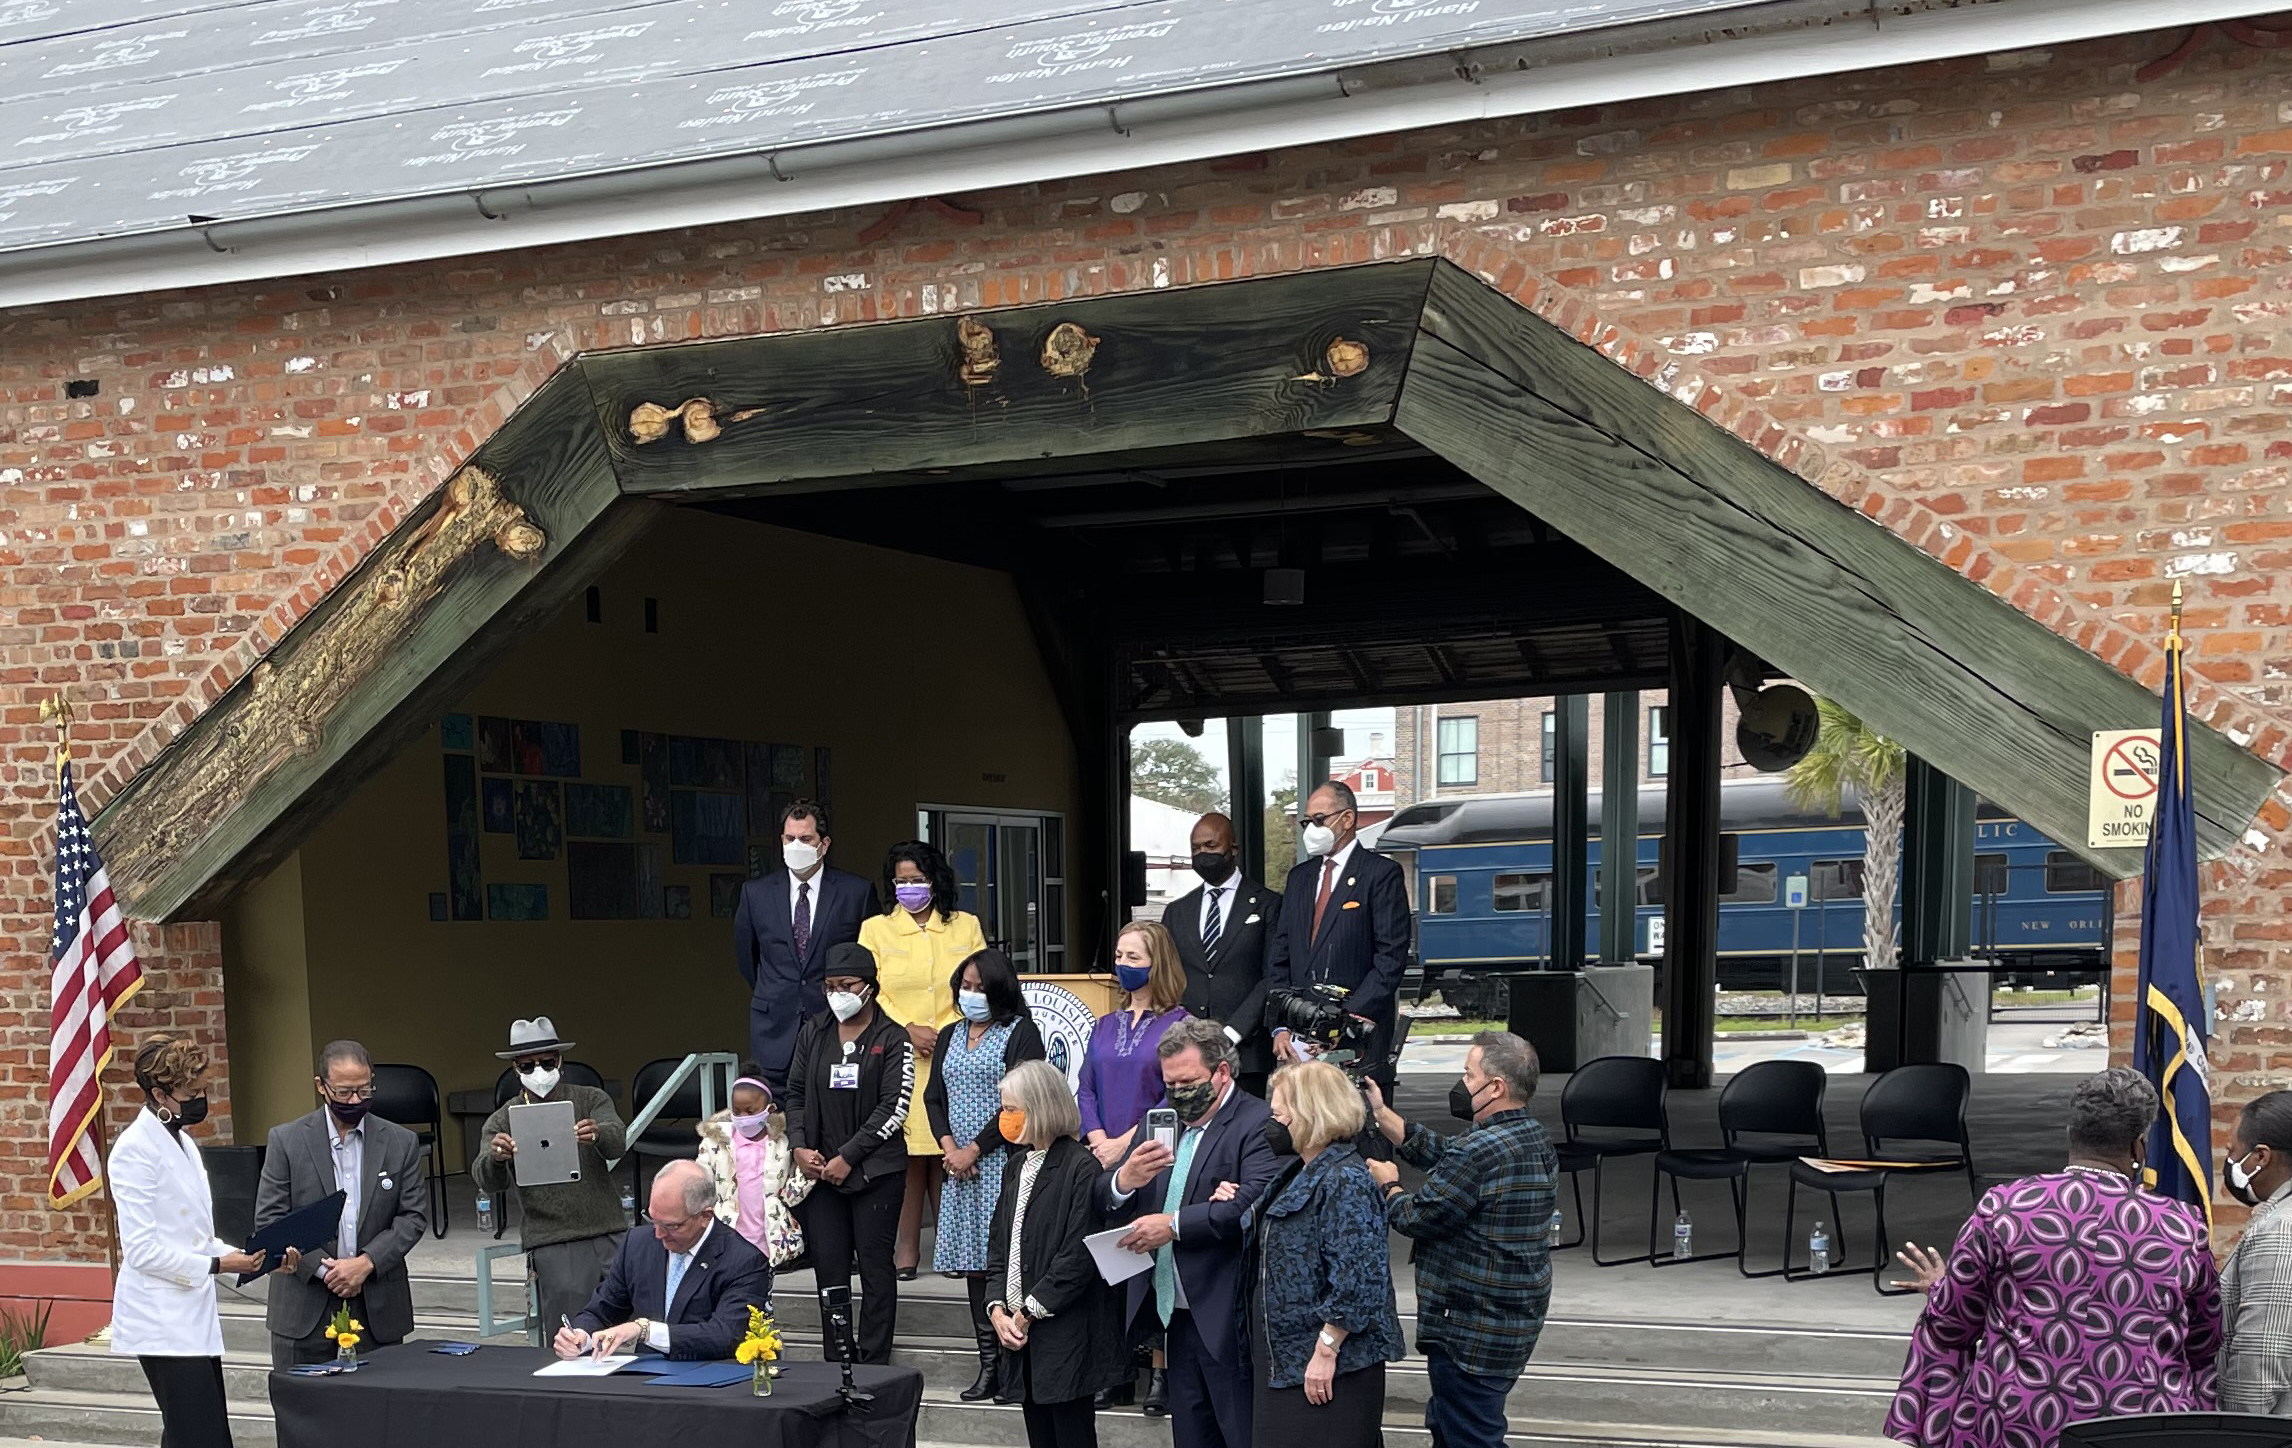 Seated at a table in a black suit and light blue tie, in front of a train, Louisiana Governor John Bel Edwards signs a posthumous pardon for Homer Plessy.He is surrounded by onlookers with face masks standing near and on and outdoor stage with a red brick and wood covering.